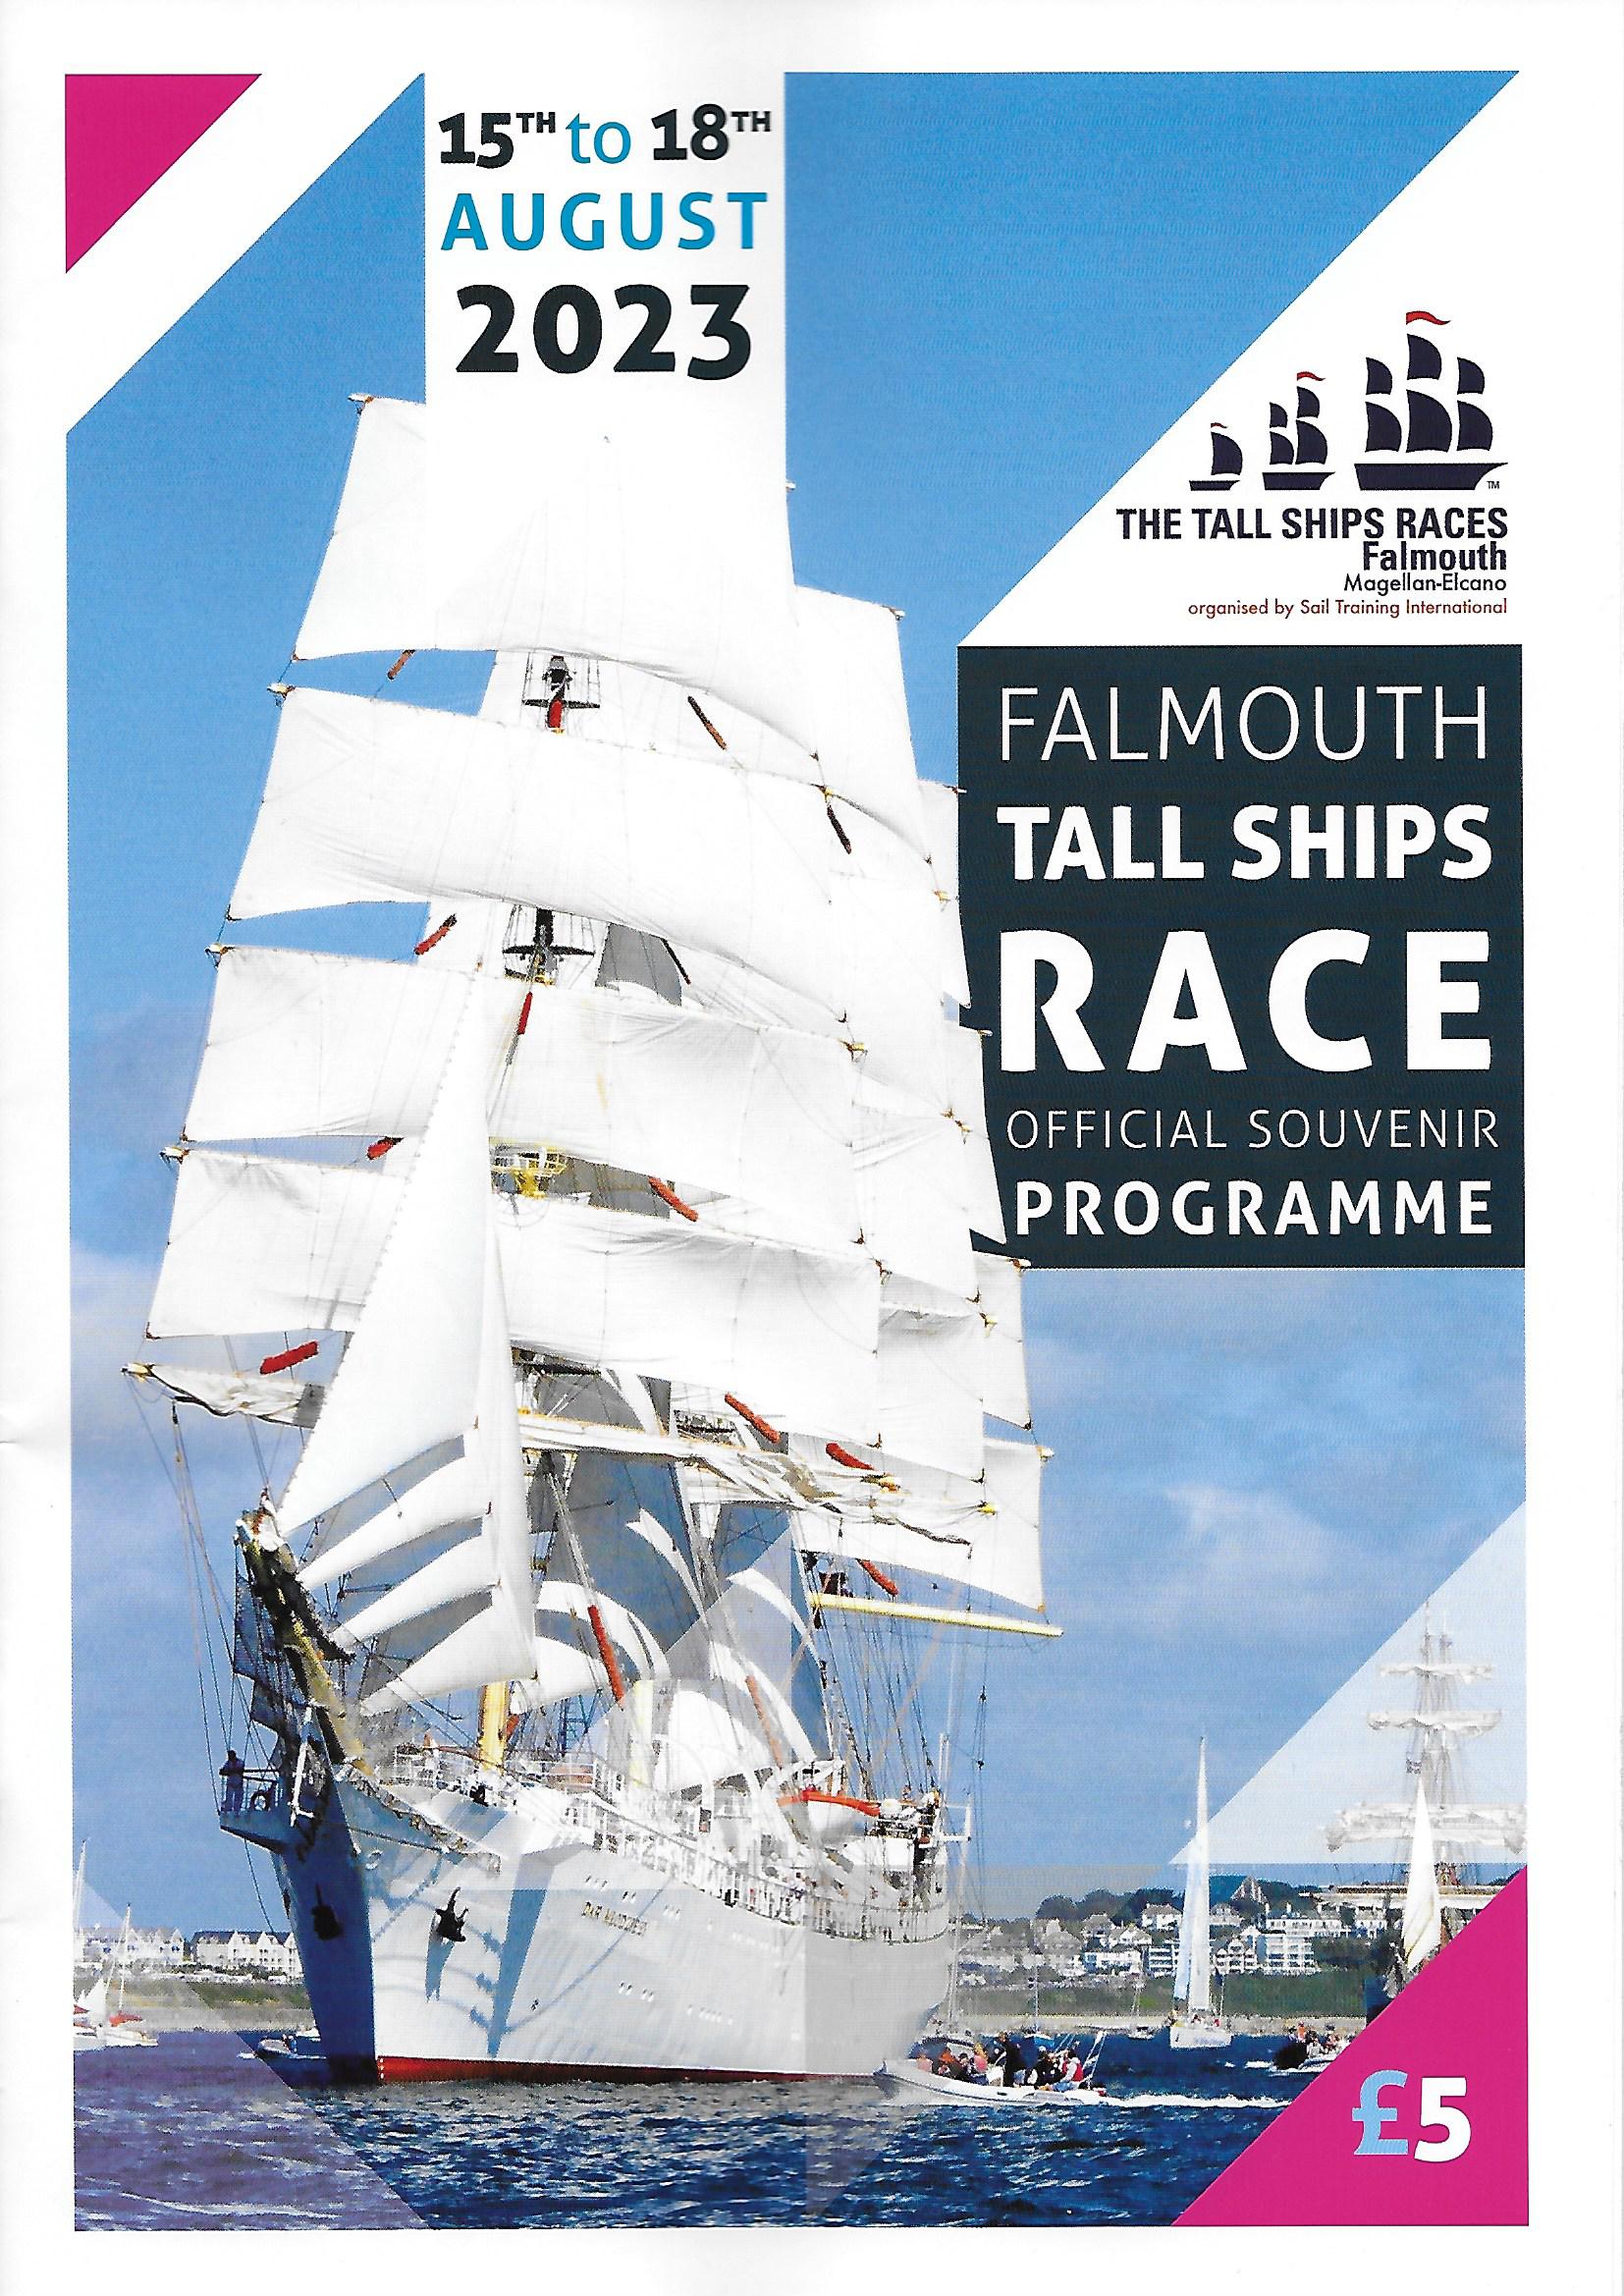 A scan of the official souvenir programme for Falmouth Tall Ships 2023. The scan is of the front cover, which features a large photo of the white Polish tall ship Dar Mlodziezy.